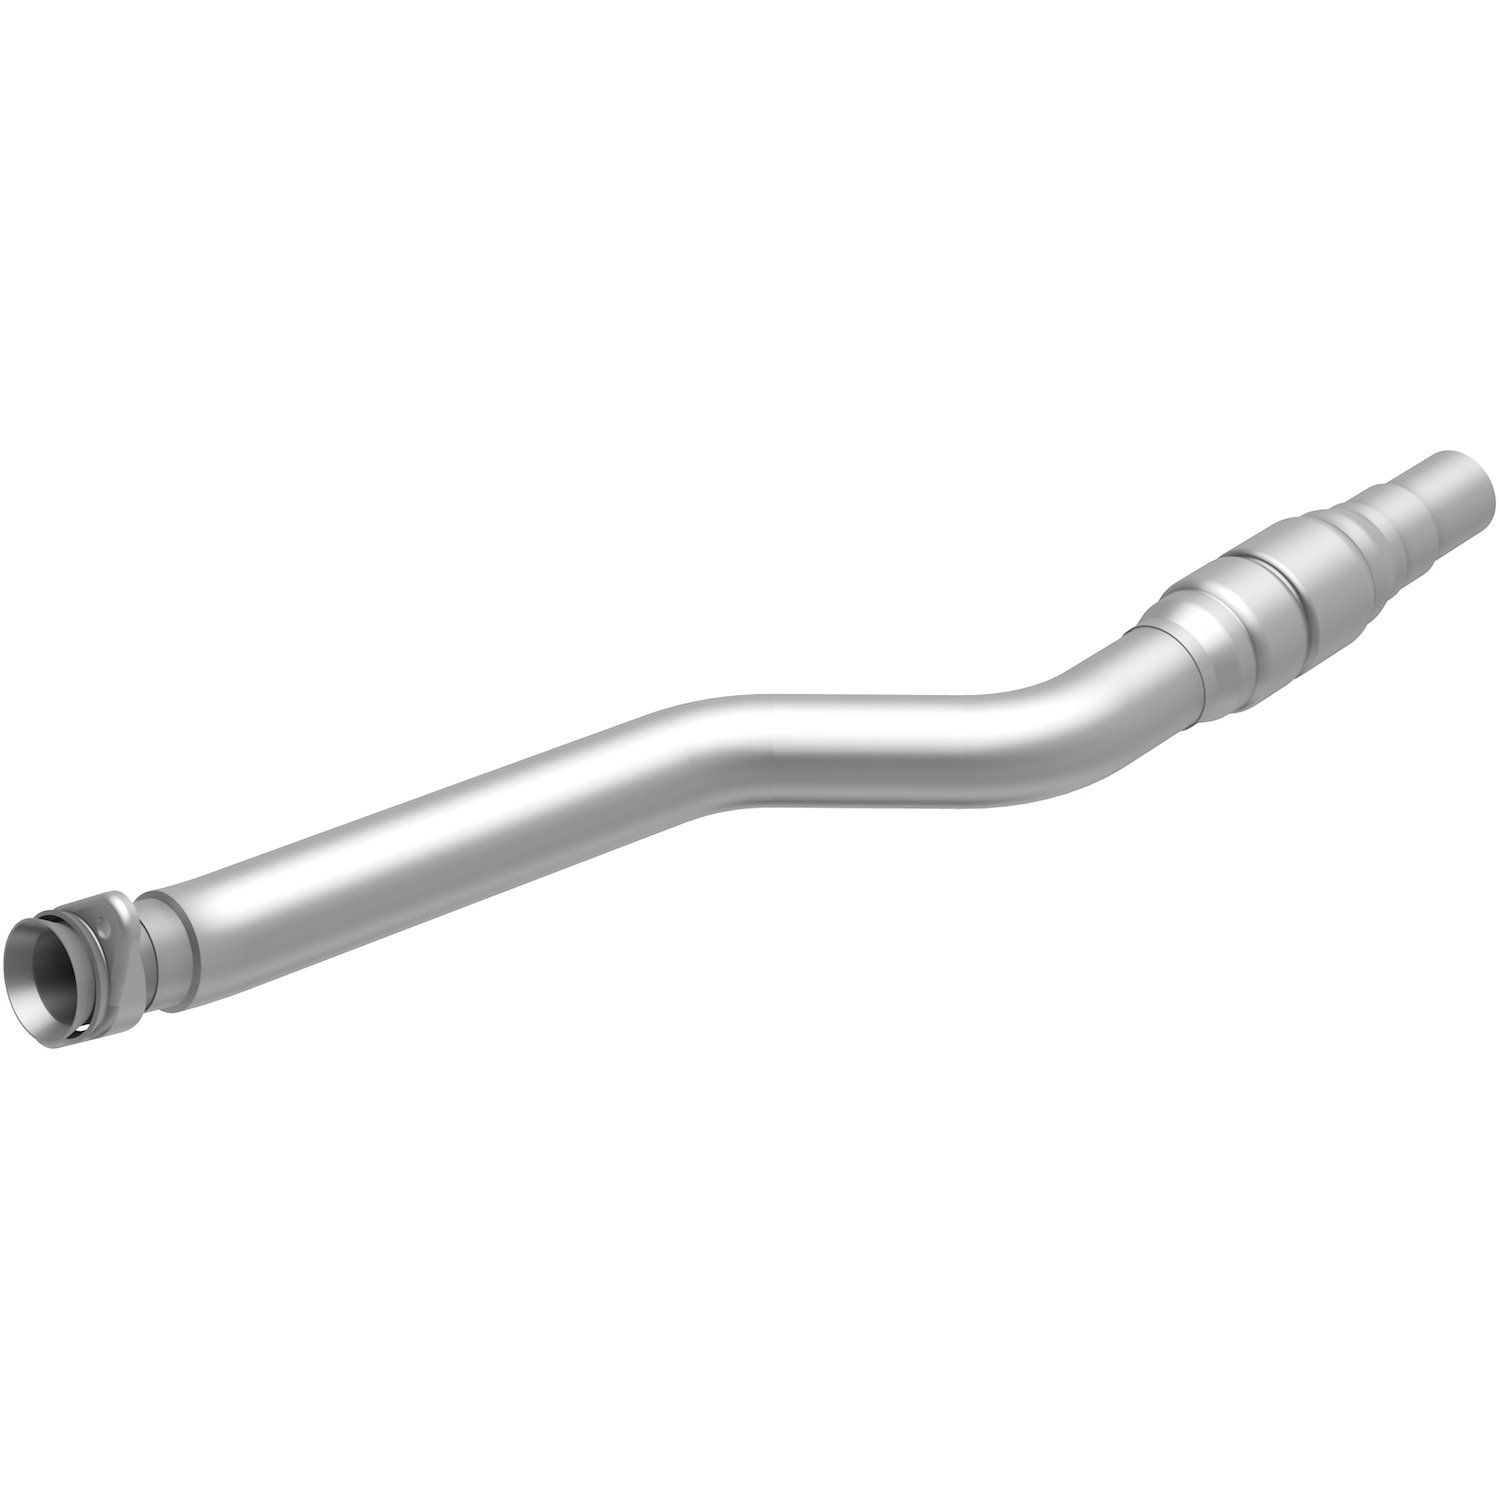 OEM Grade Federal / EPA Compliant Direct-Fit Catalytic Converter 49265